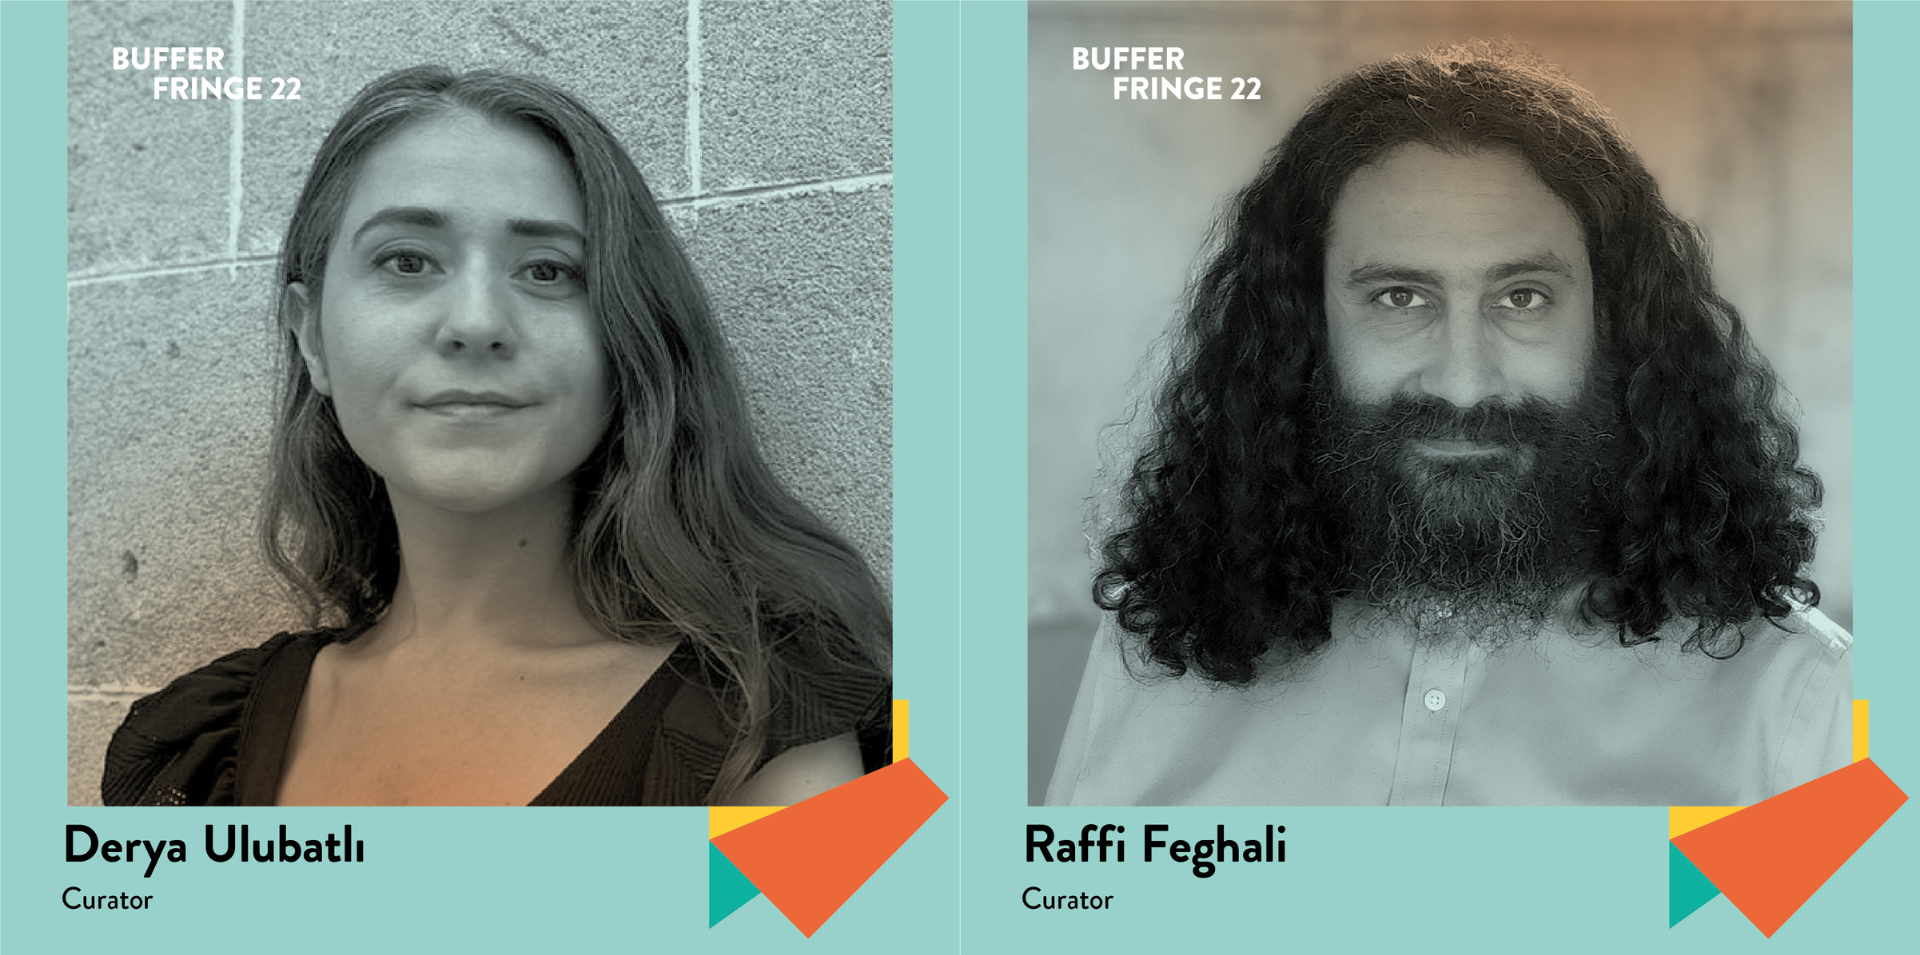 You are currently viewing Sesta – Episode 11: Sesta Buffer Fringe Special with Raffi Feghali and Derya Ulubatlı (6/10/2022)